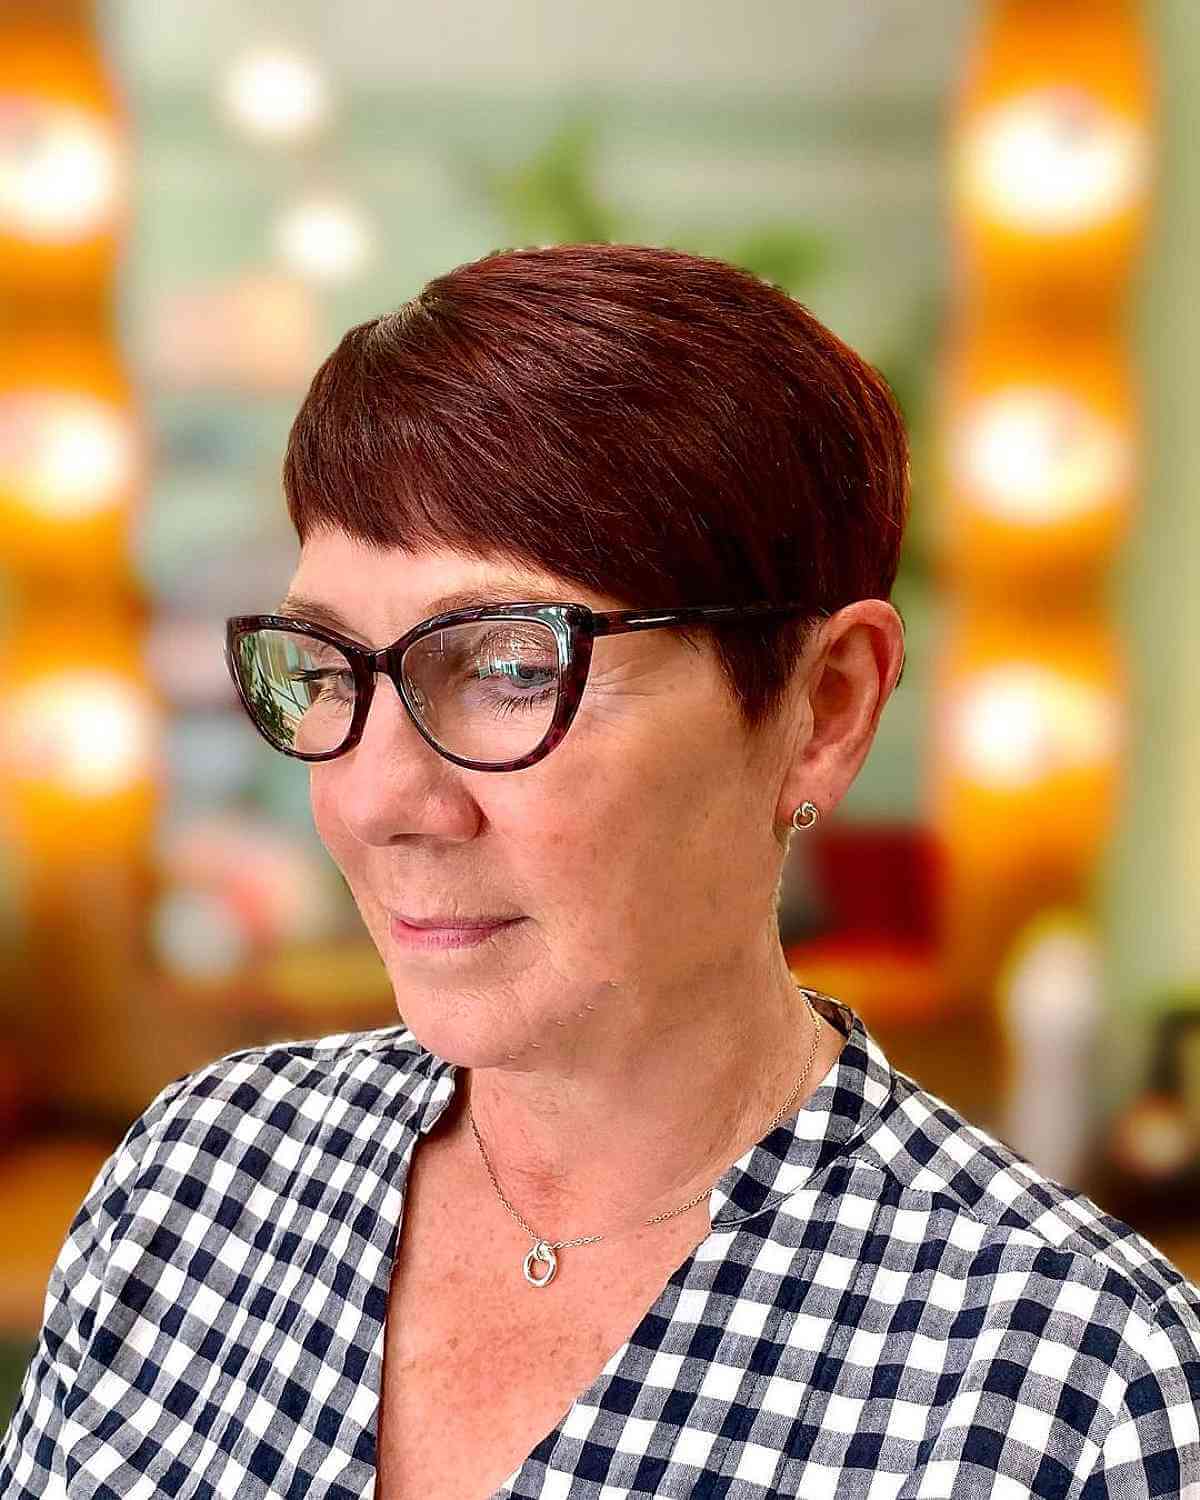 Dark Red Pixie with Side-Swept Baby Fringe for Ladies 60 and Up with Glasses